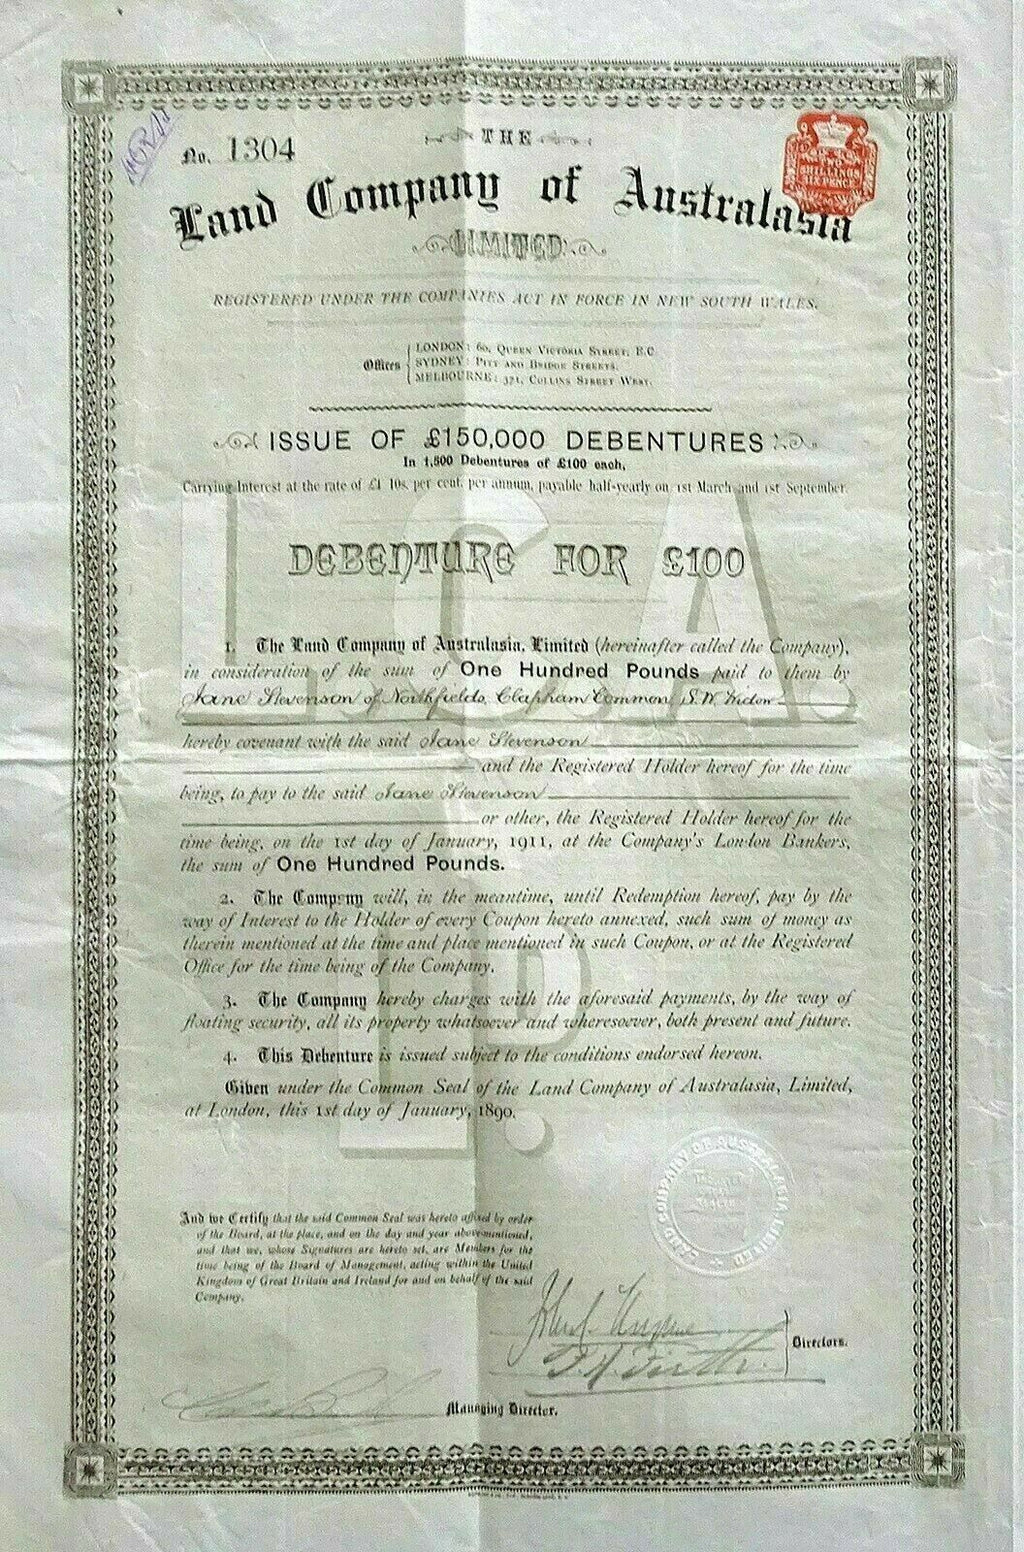 The Land Company of Australasia Limited 1890 New South Wales Stock Bond Certificate